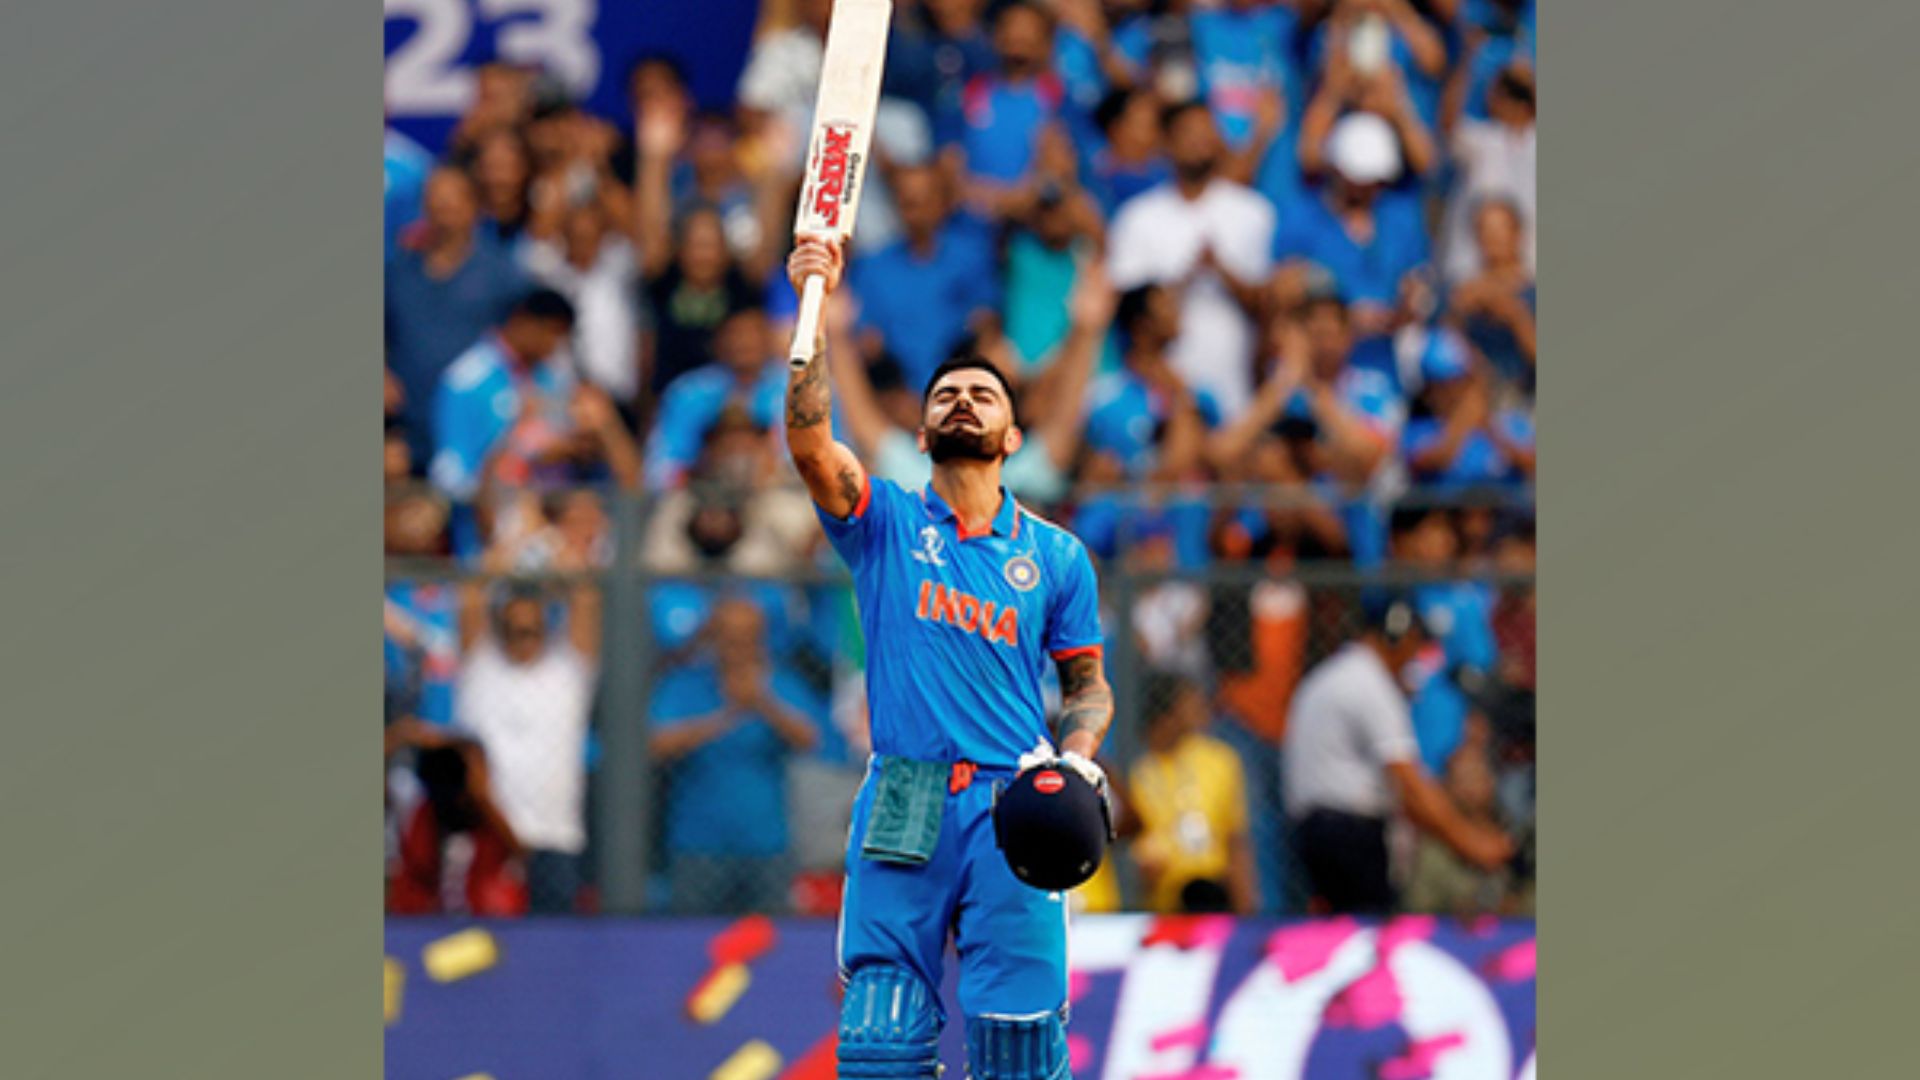 “Virat has dealt with hopes, dreams of a billion people, deserves every accolade”, according to Brendon McCullum